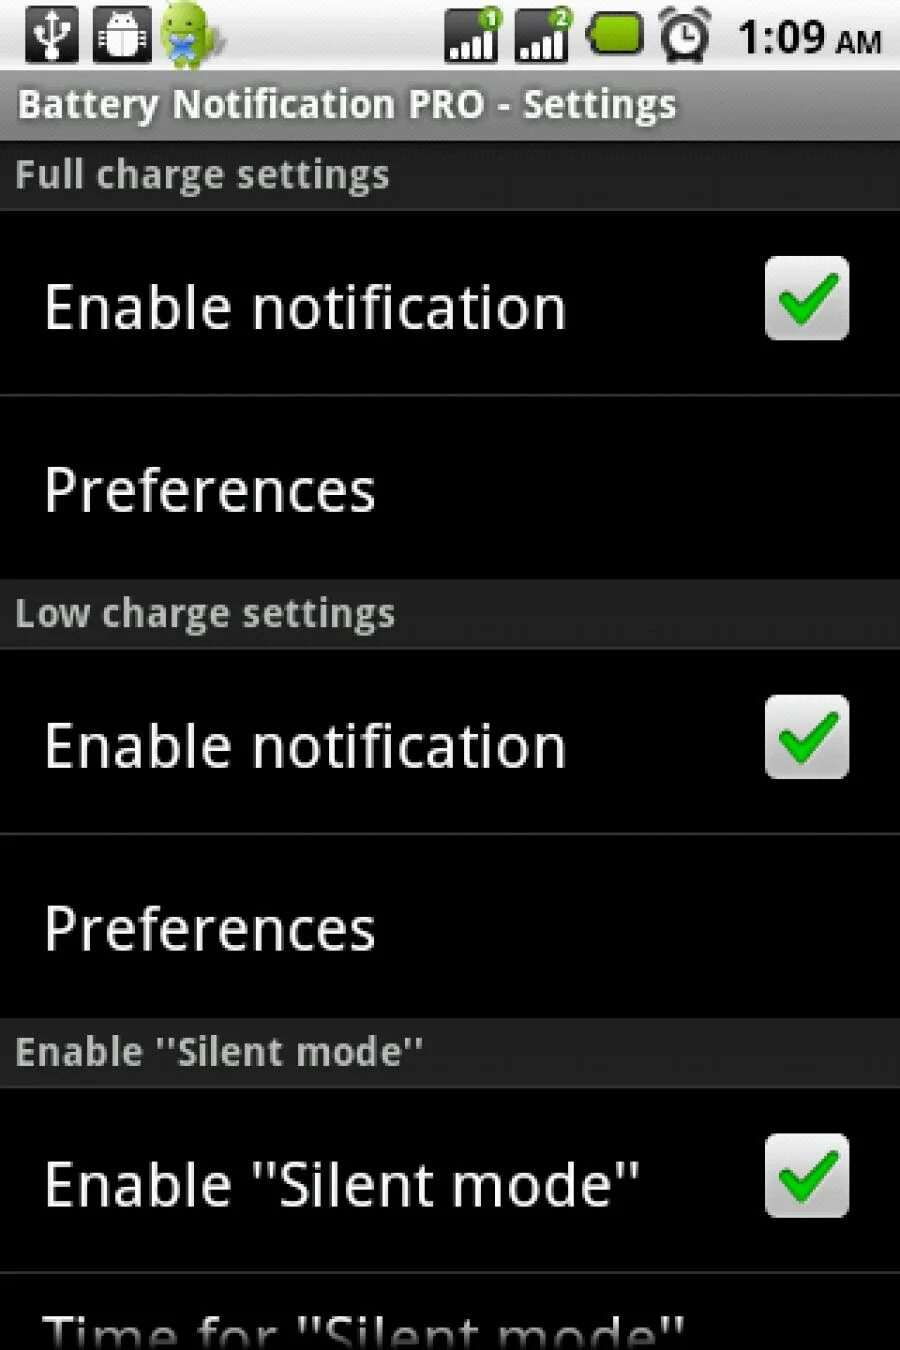 Battery Notification APK.. Battery Notification Push. Battery Mode. Battery Low Charging Samsung Android 4.4.